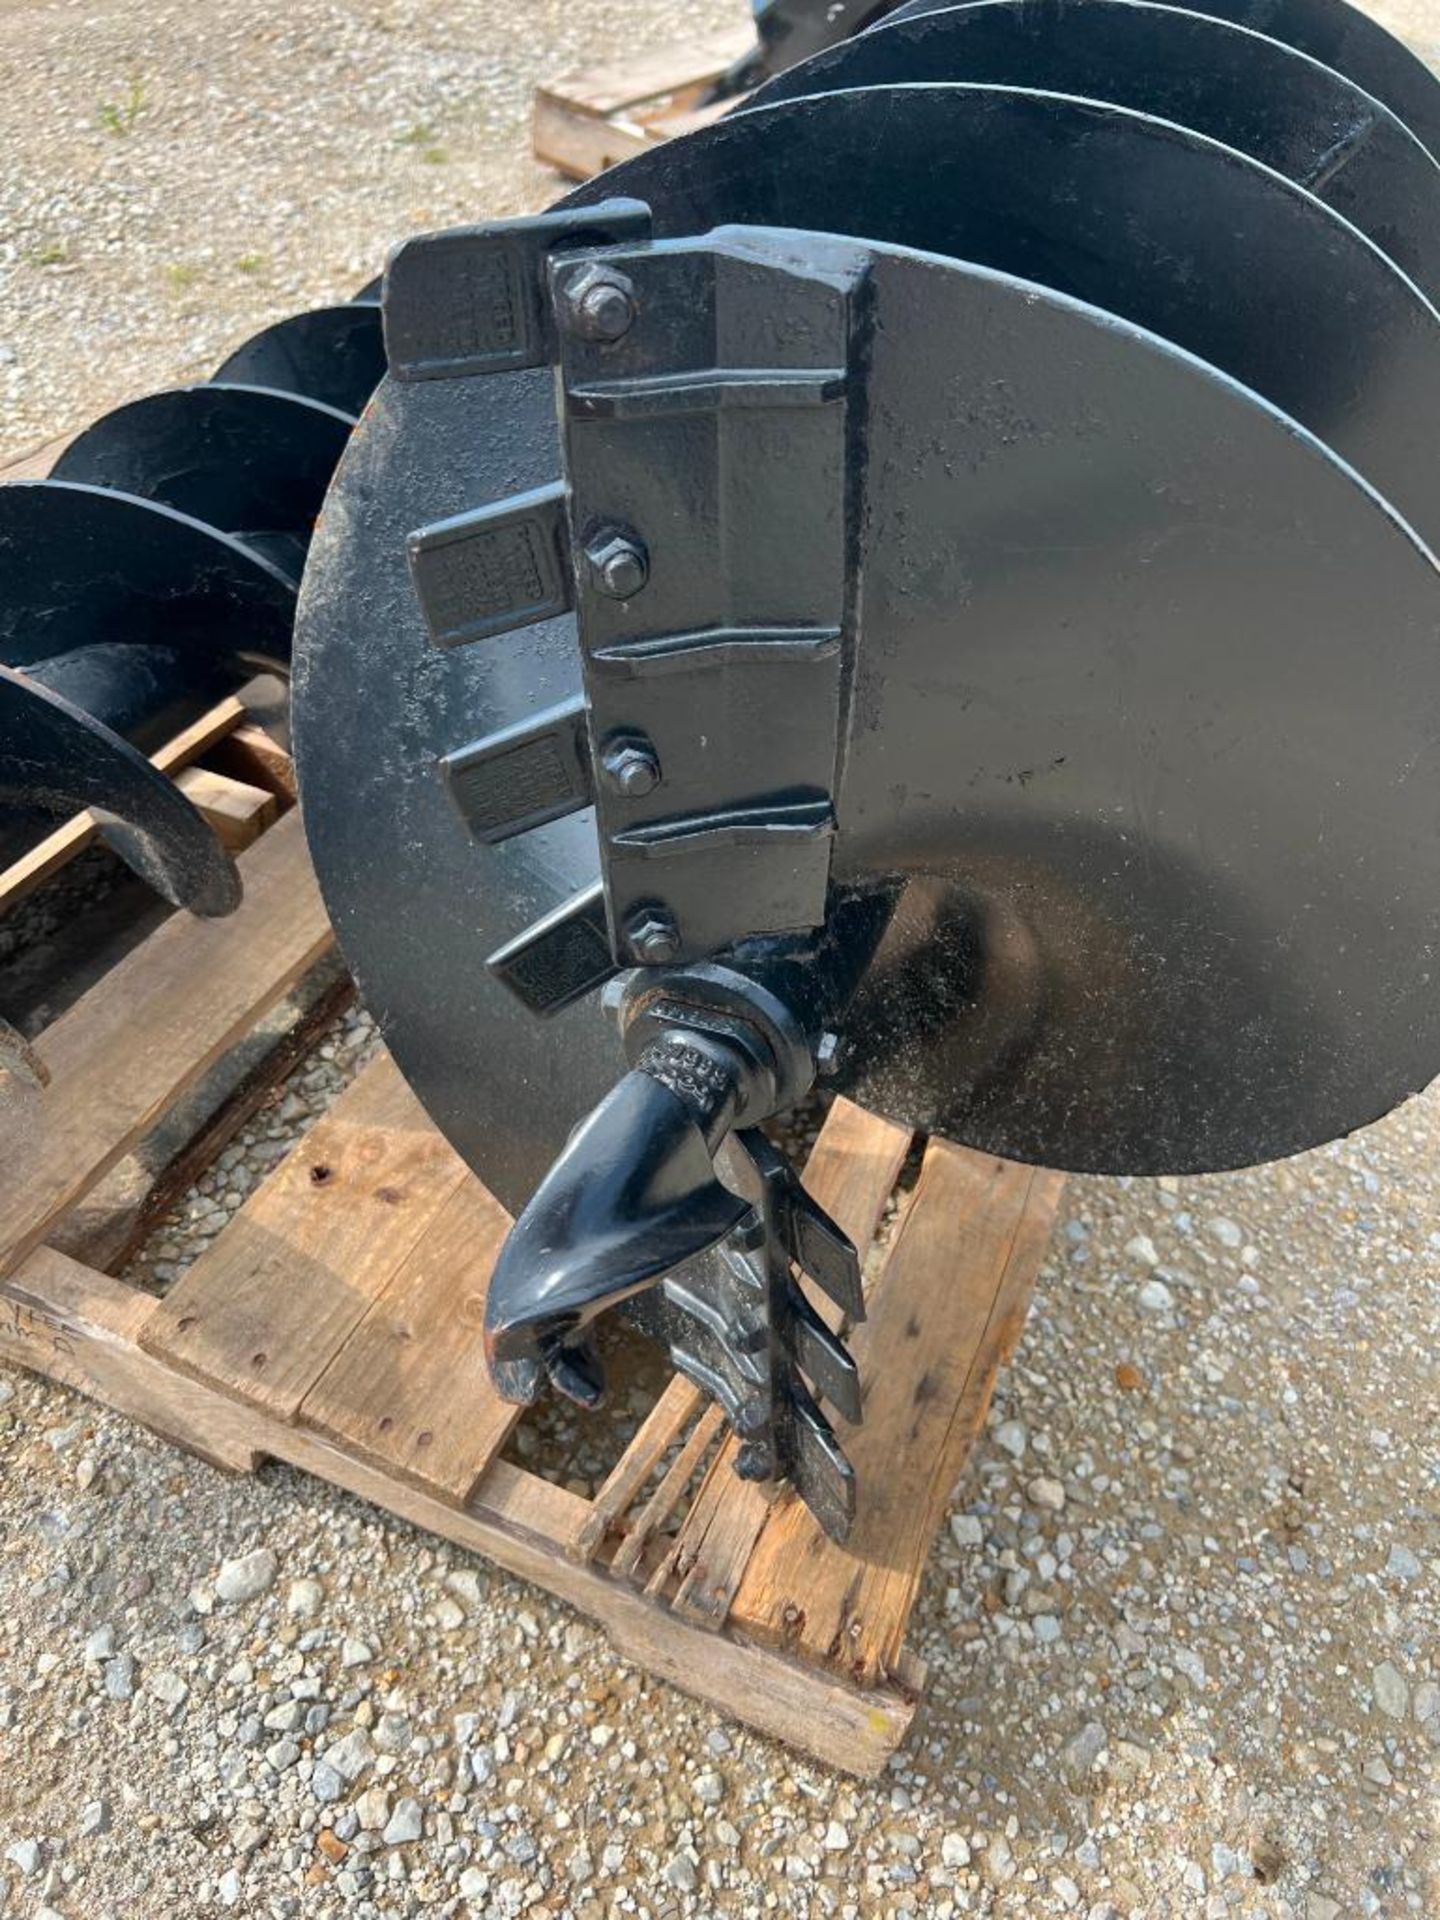 New Bobcat 24" Auger Bit. Located in Altamont, IL - Image 3 of 4